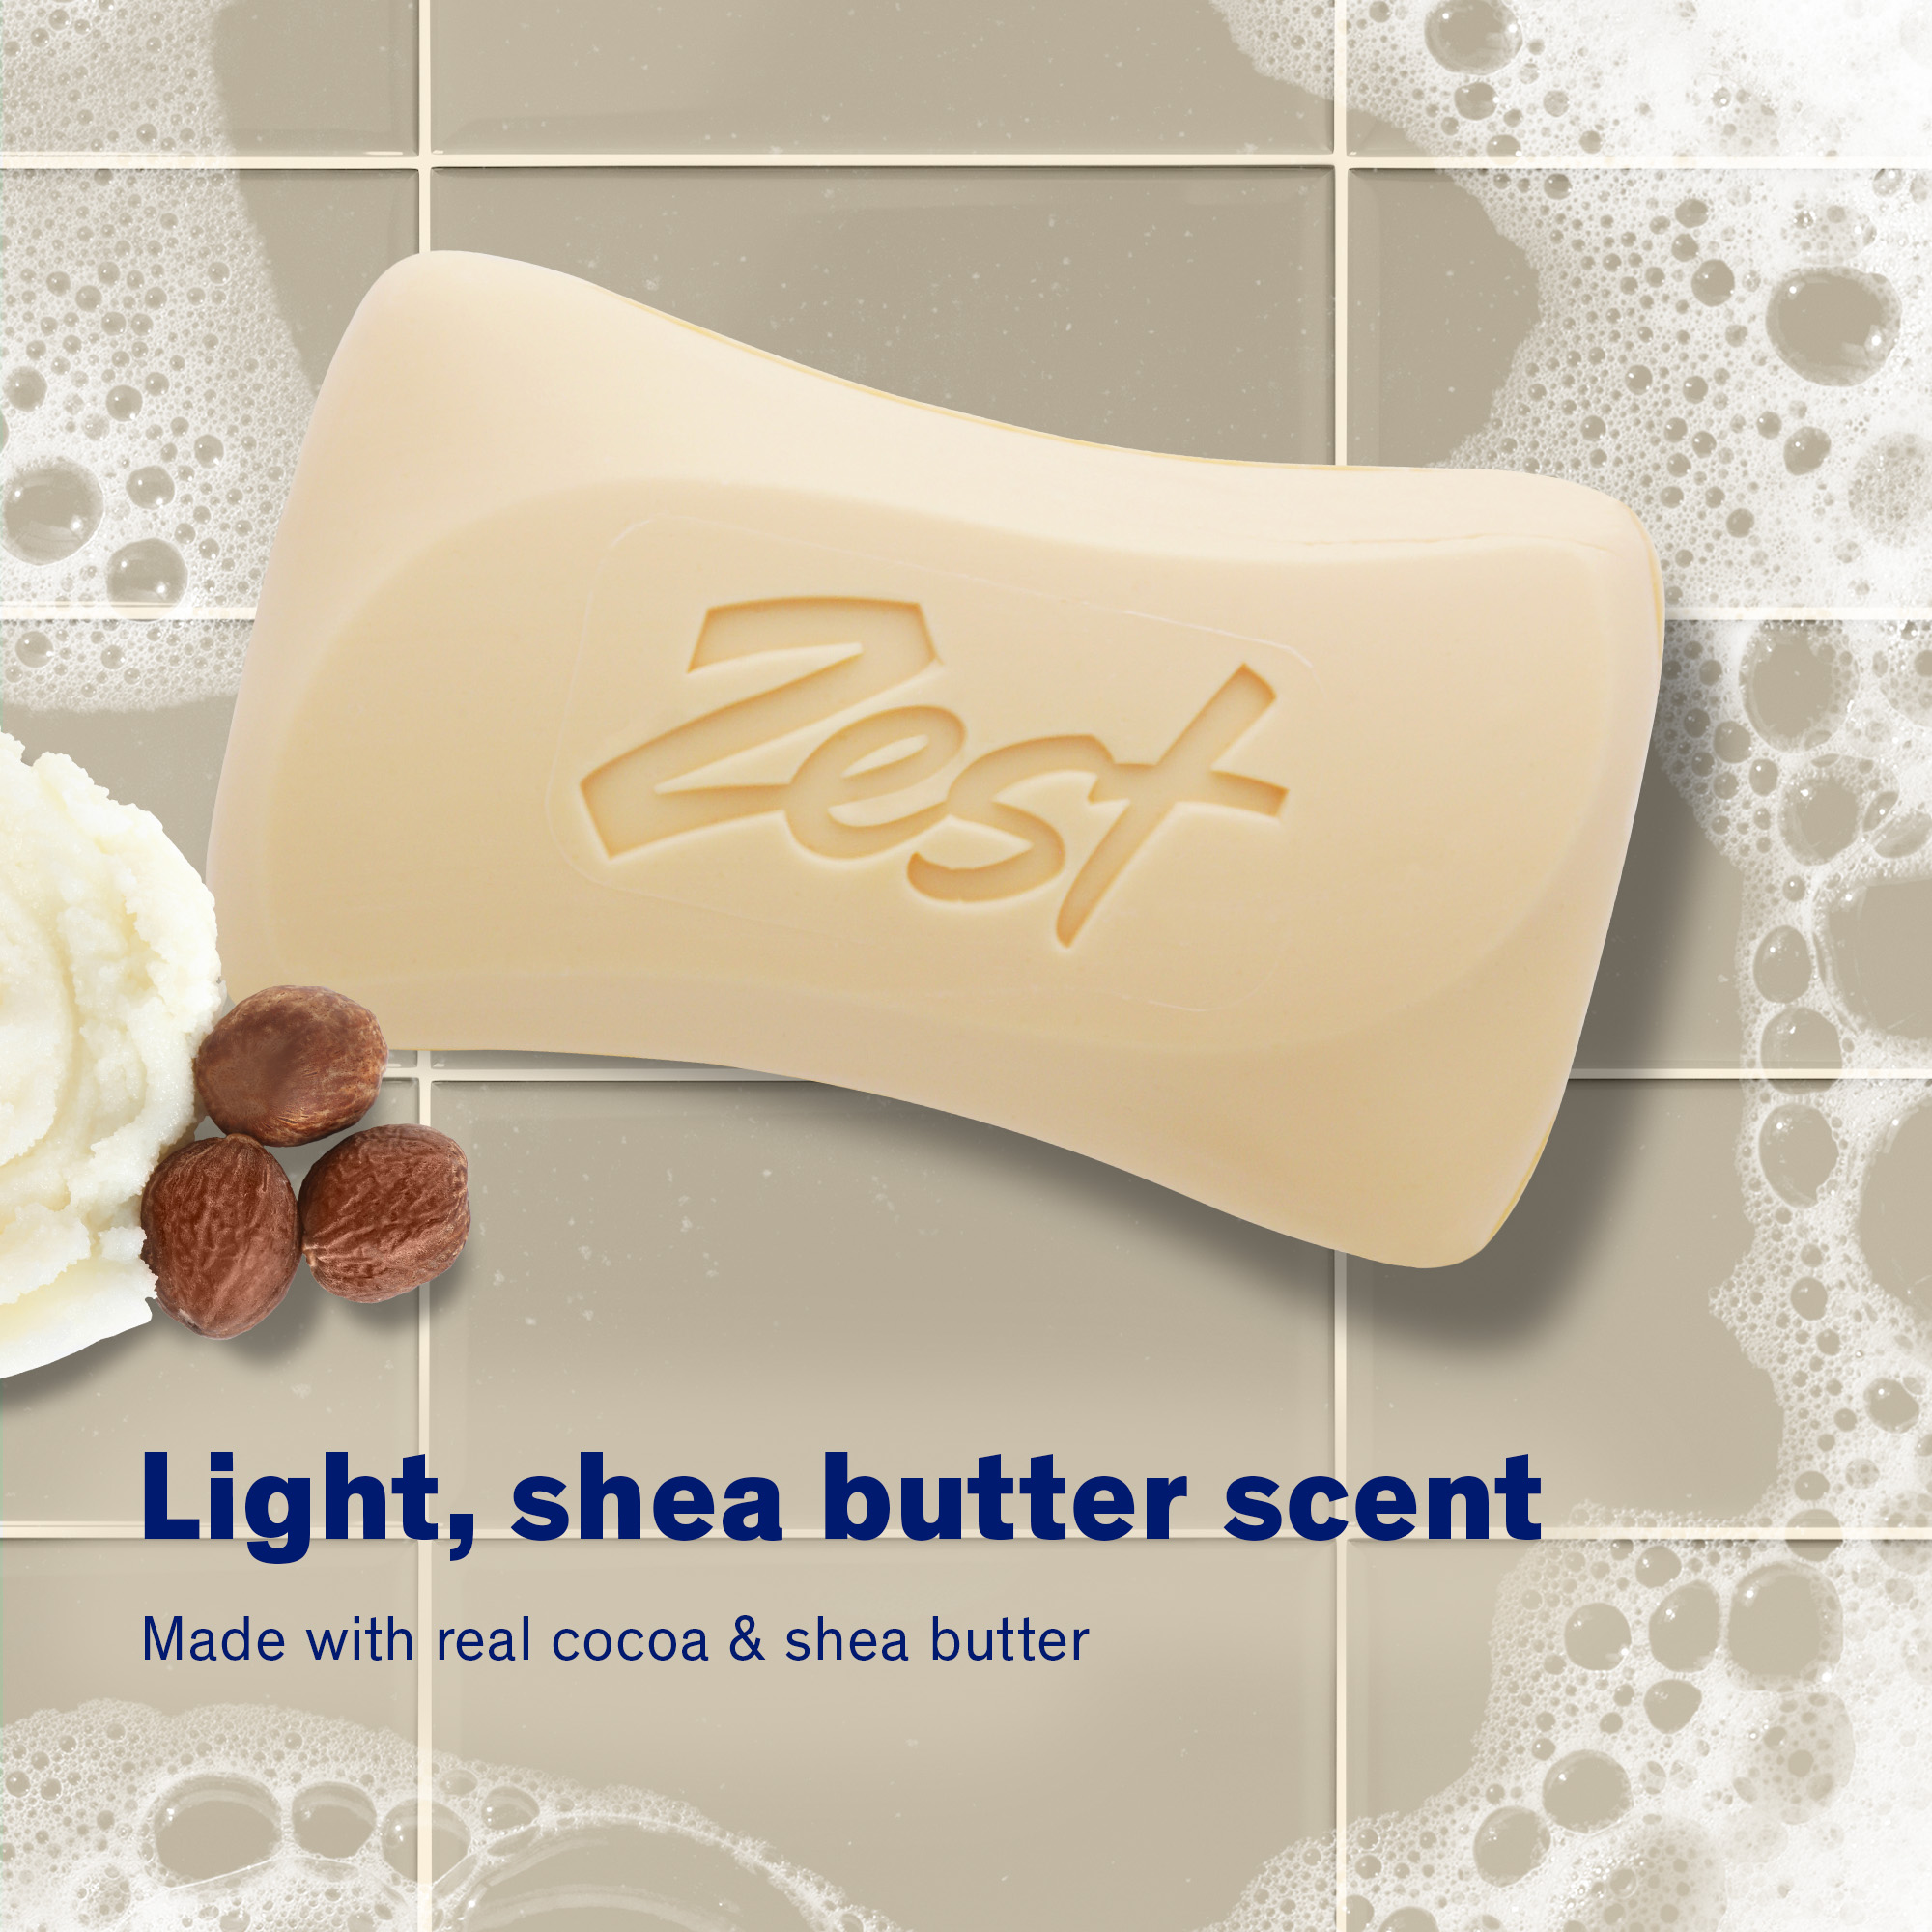 Zest Cocoa Butter & Shea Bar Soap, for All Skin Types, 4 oz, 8 Bars - image 3 of 7